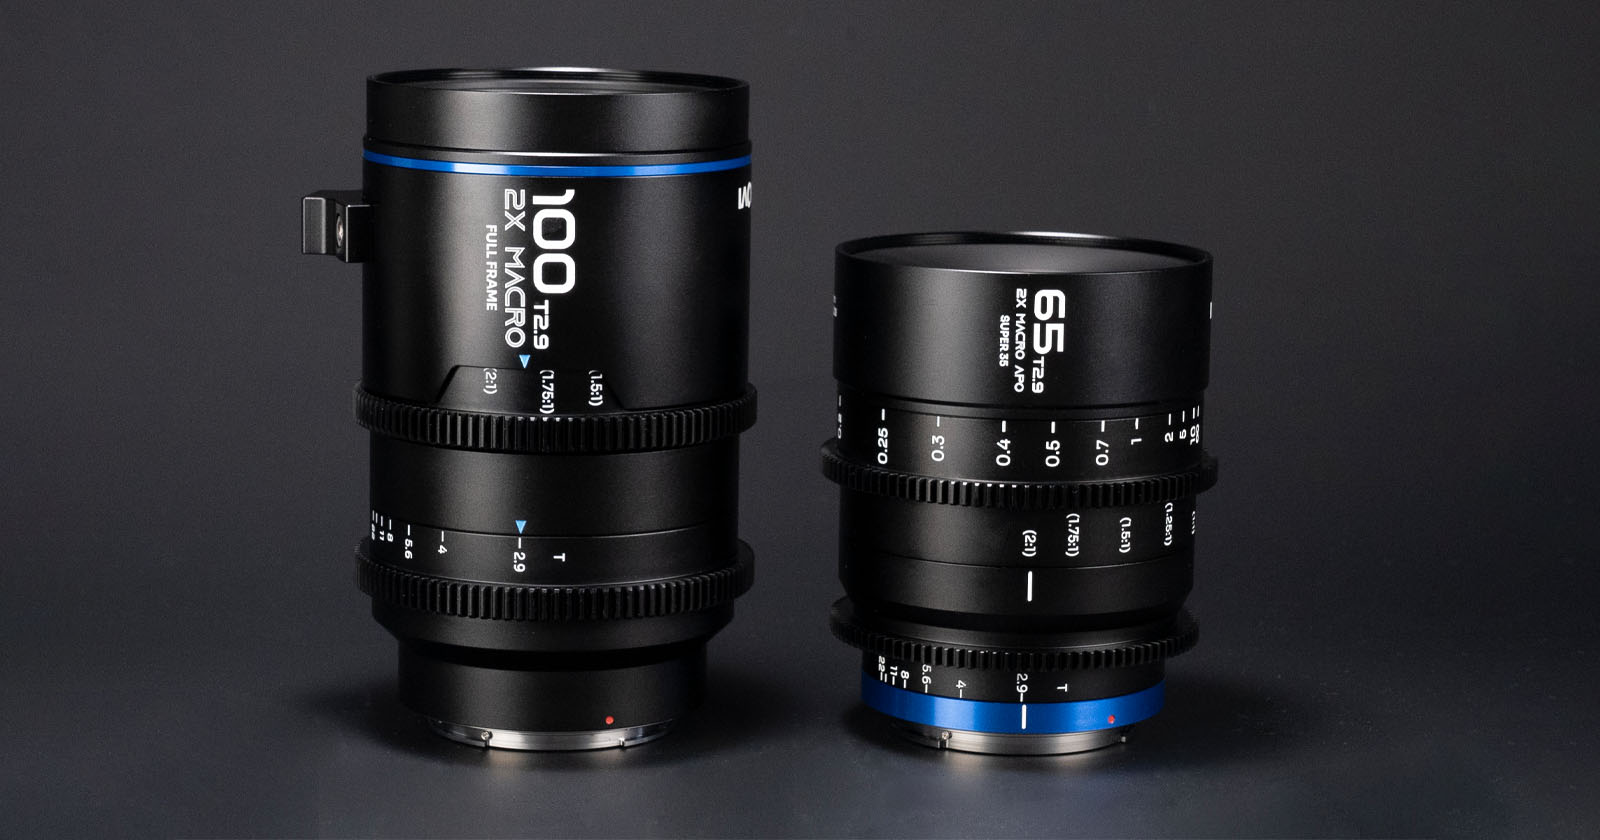 Laowa’s Two New Macro Cine Lenses are the First with 2x Magnification